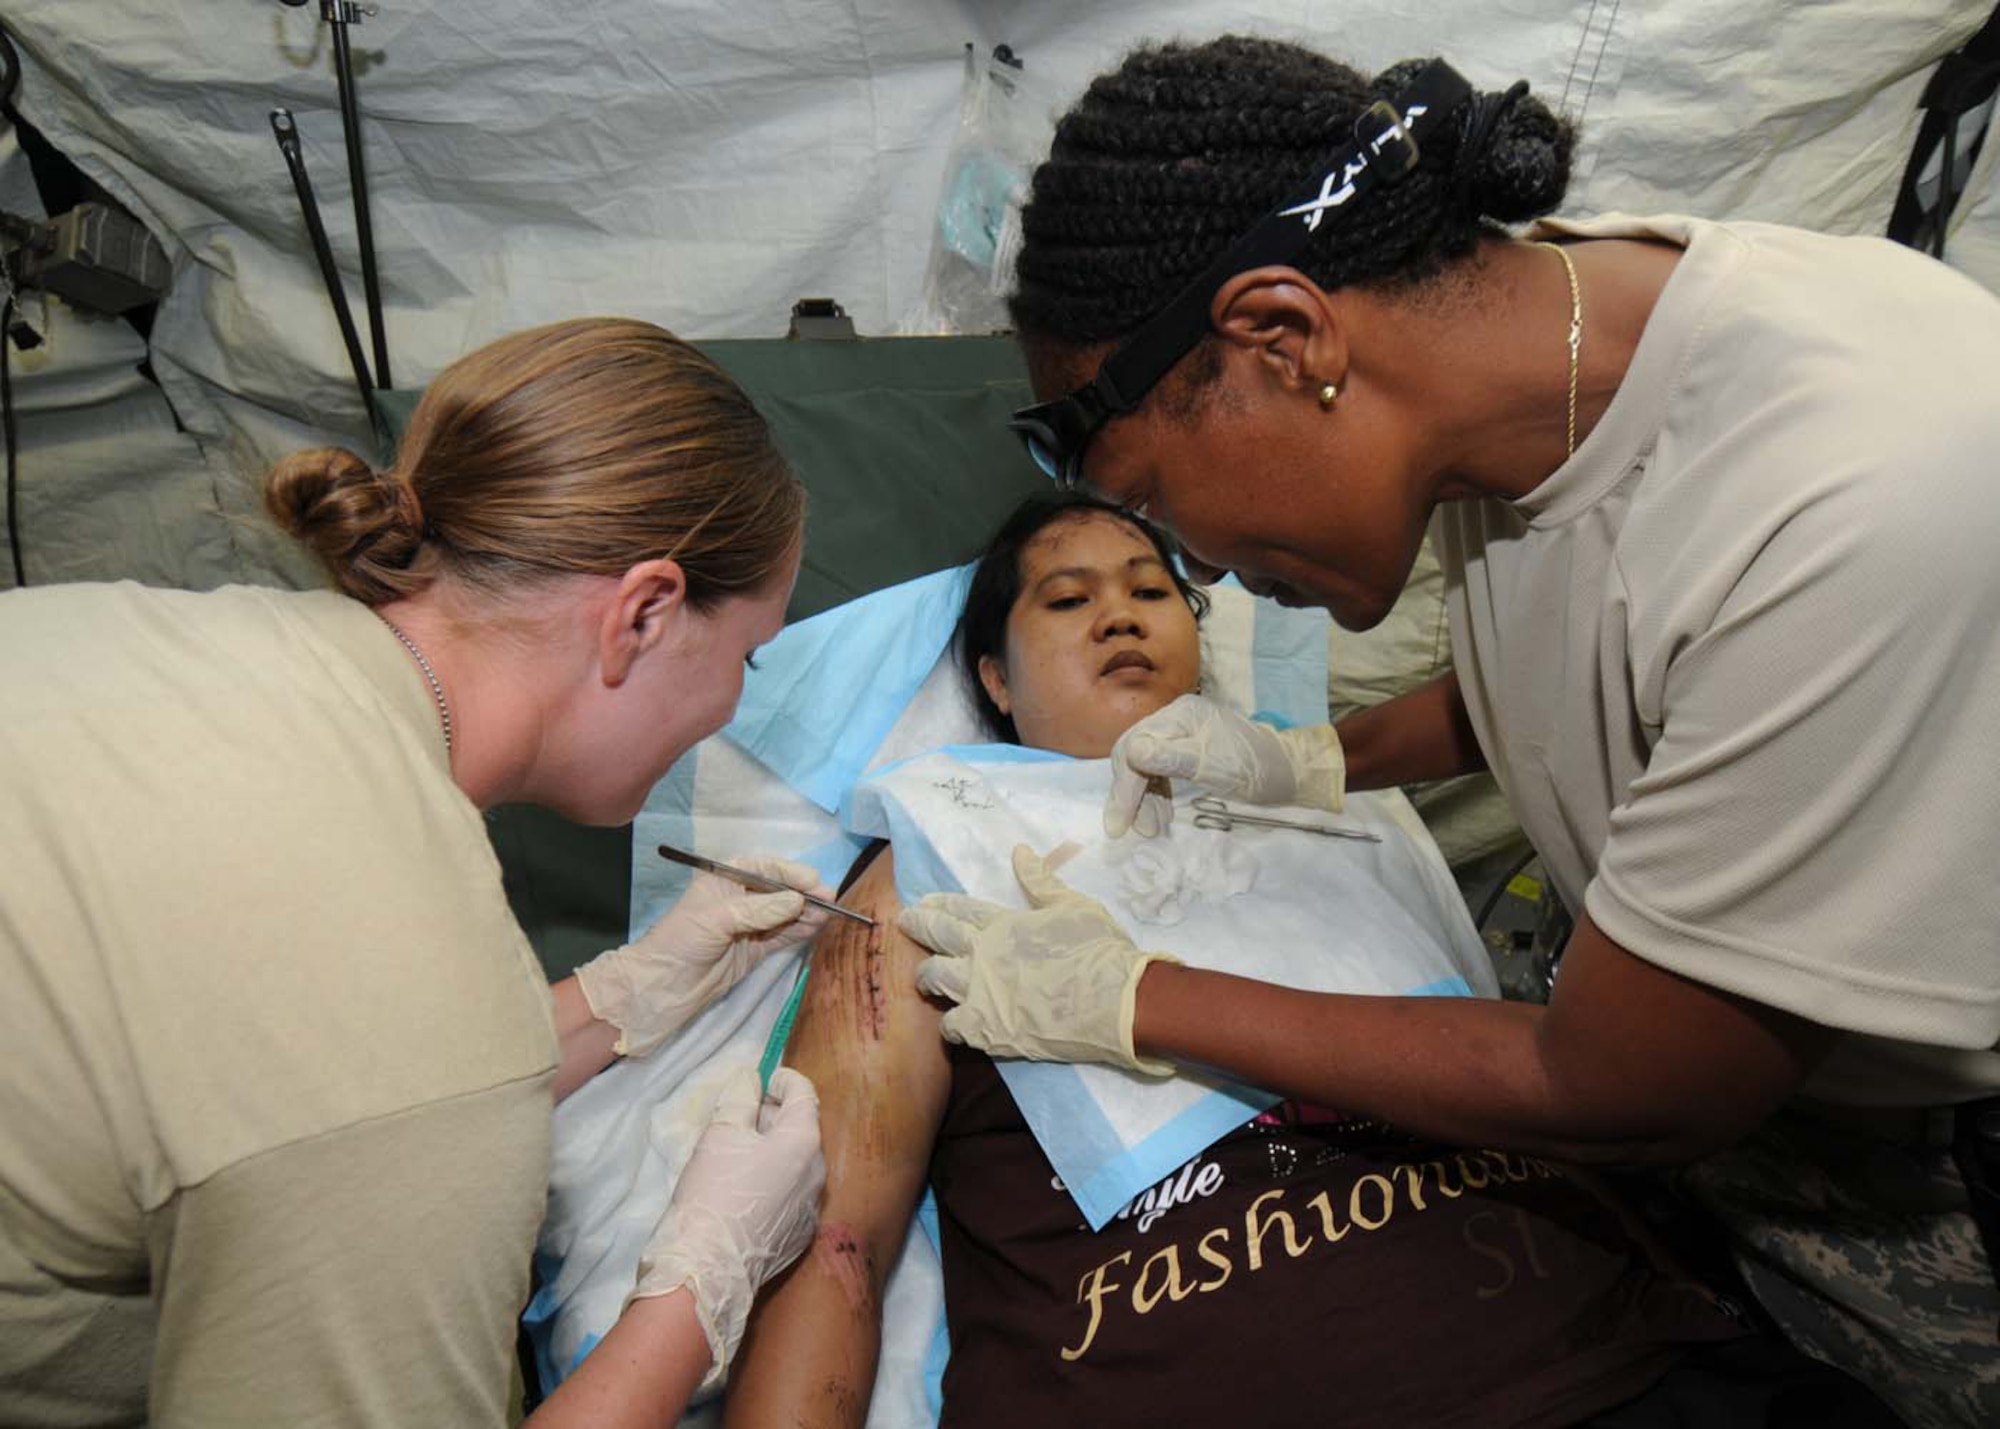 PADANG, Indonesia -- Staff Sgt. Beth Sherman (left) and Maj. Brenda Parker remove sutures in a mobile field hospital Oct. 8. Sergeant Sherman, an individual duty medical technician, and Major Parker, a nurse, are deployed from the 36th Medical Group at Andersen Air Force Base, Guam, as part of a U.S. Air Force humanitarian assistance rapid response team. (U.S. Air Force photo/Staff Sgt. Veronica Pierce)